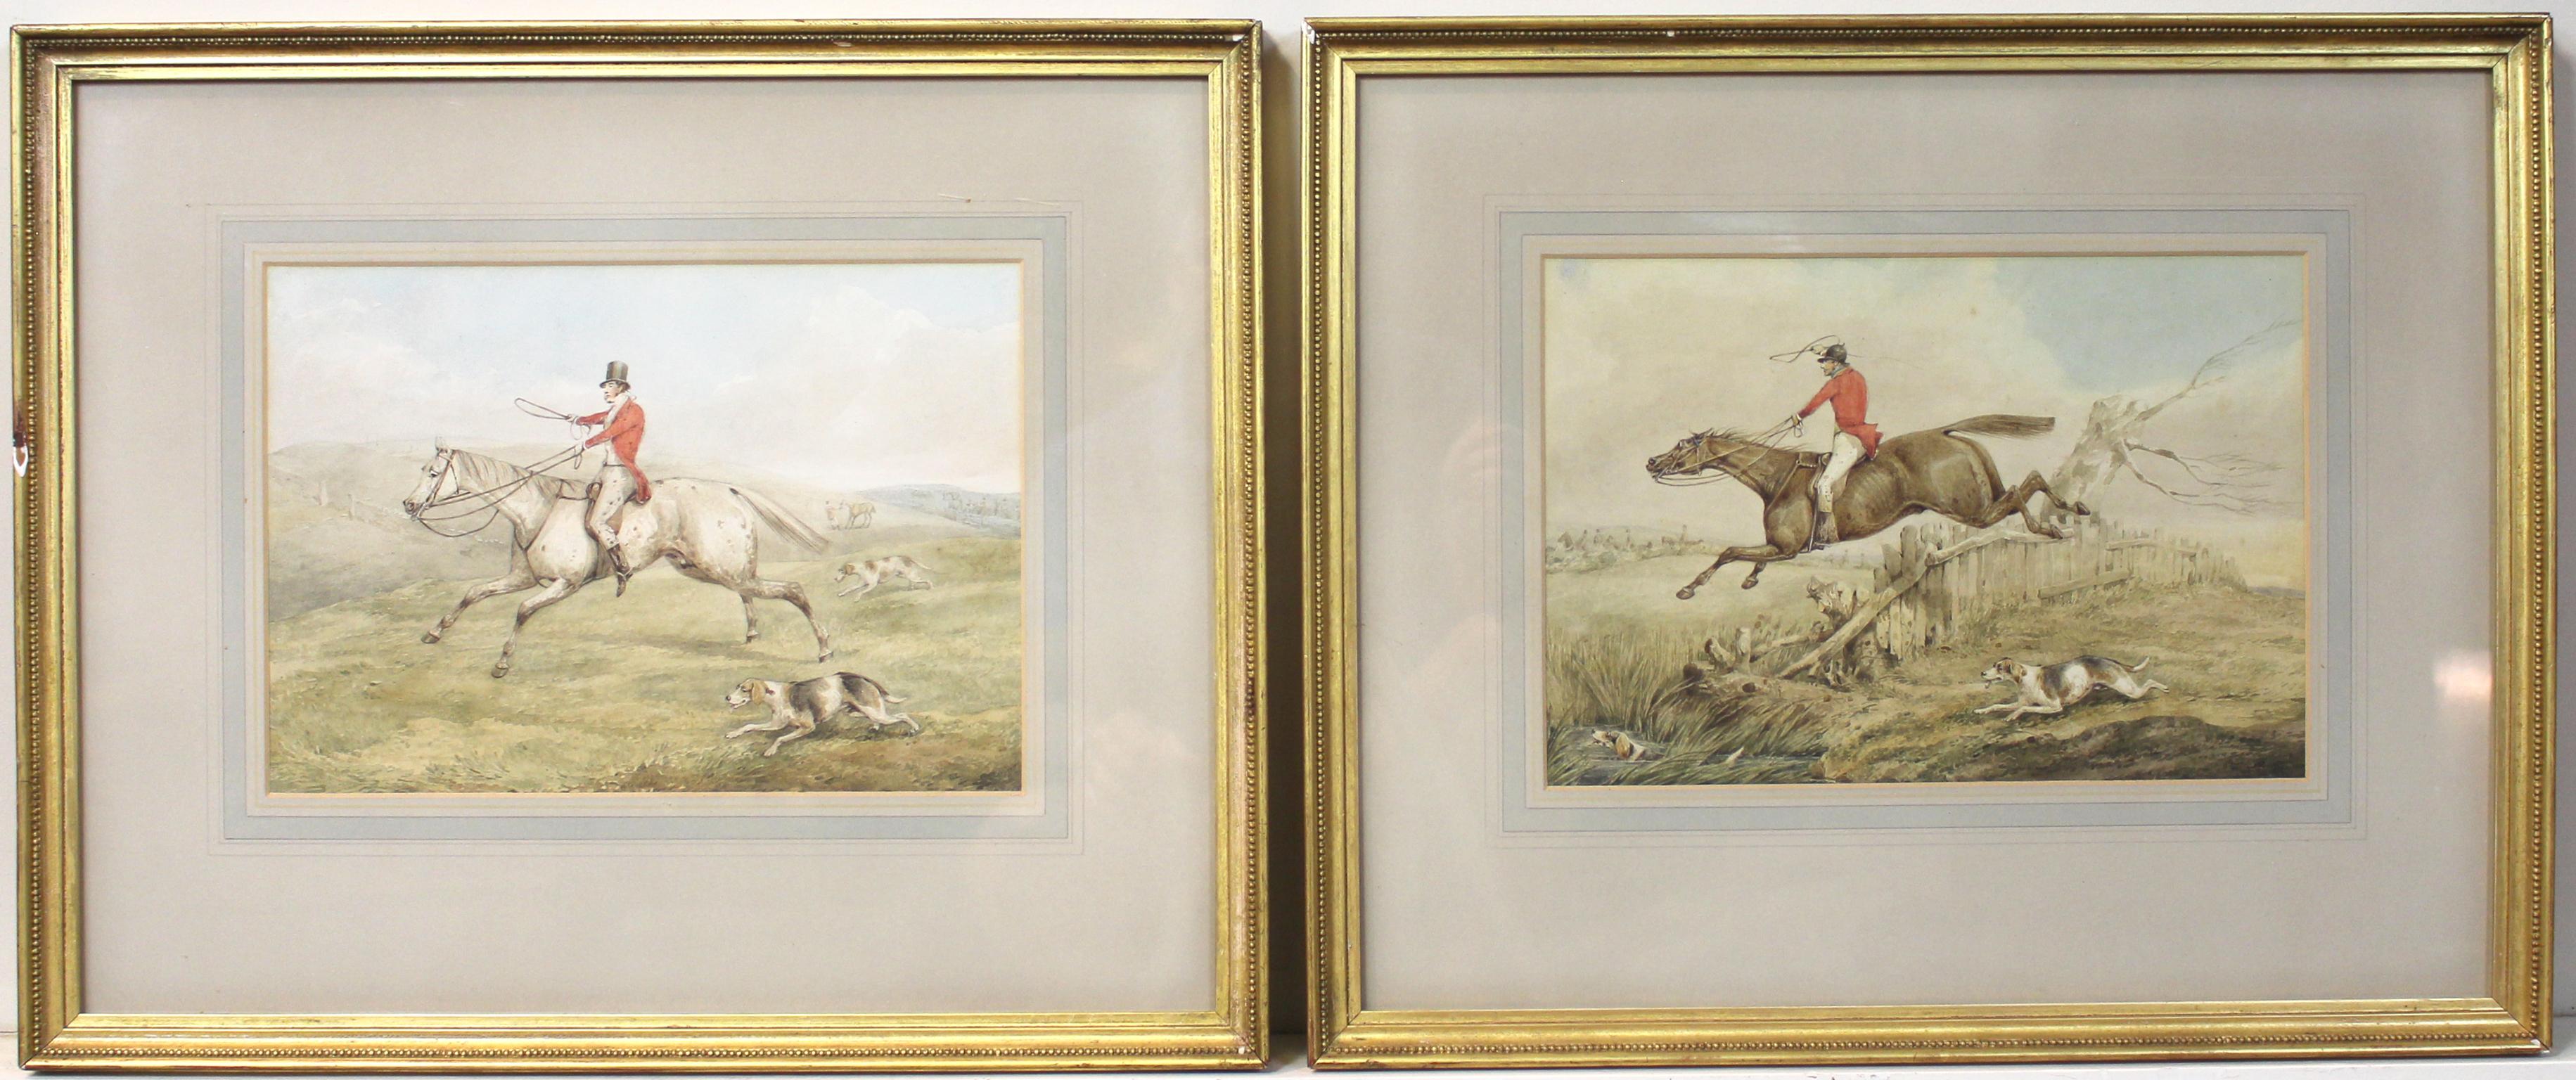 A lovely pair of early 19th century original watercolor paintings of fox hunting scenes by noted English sporting artist Henry Thomas Alken. The paintings were sold from the esteemed Arthur Ackermann & Sons gallery in London.